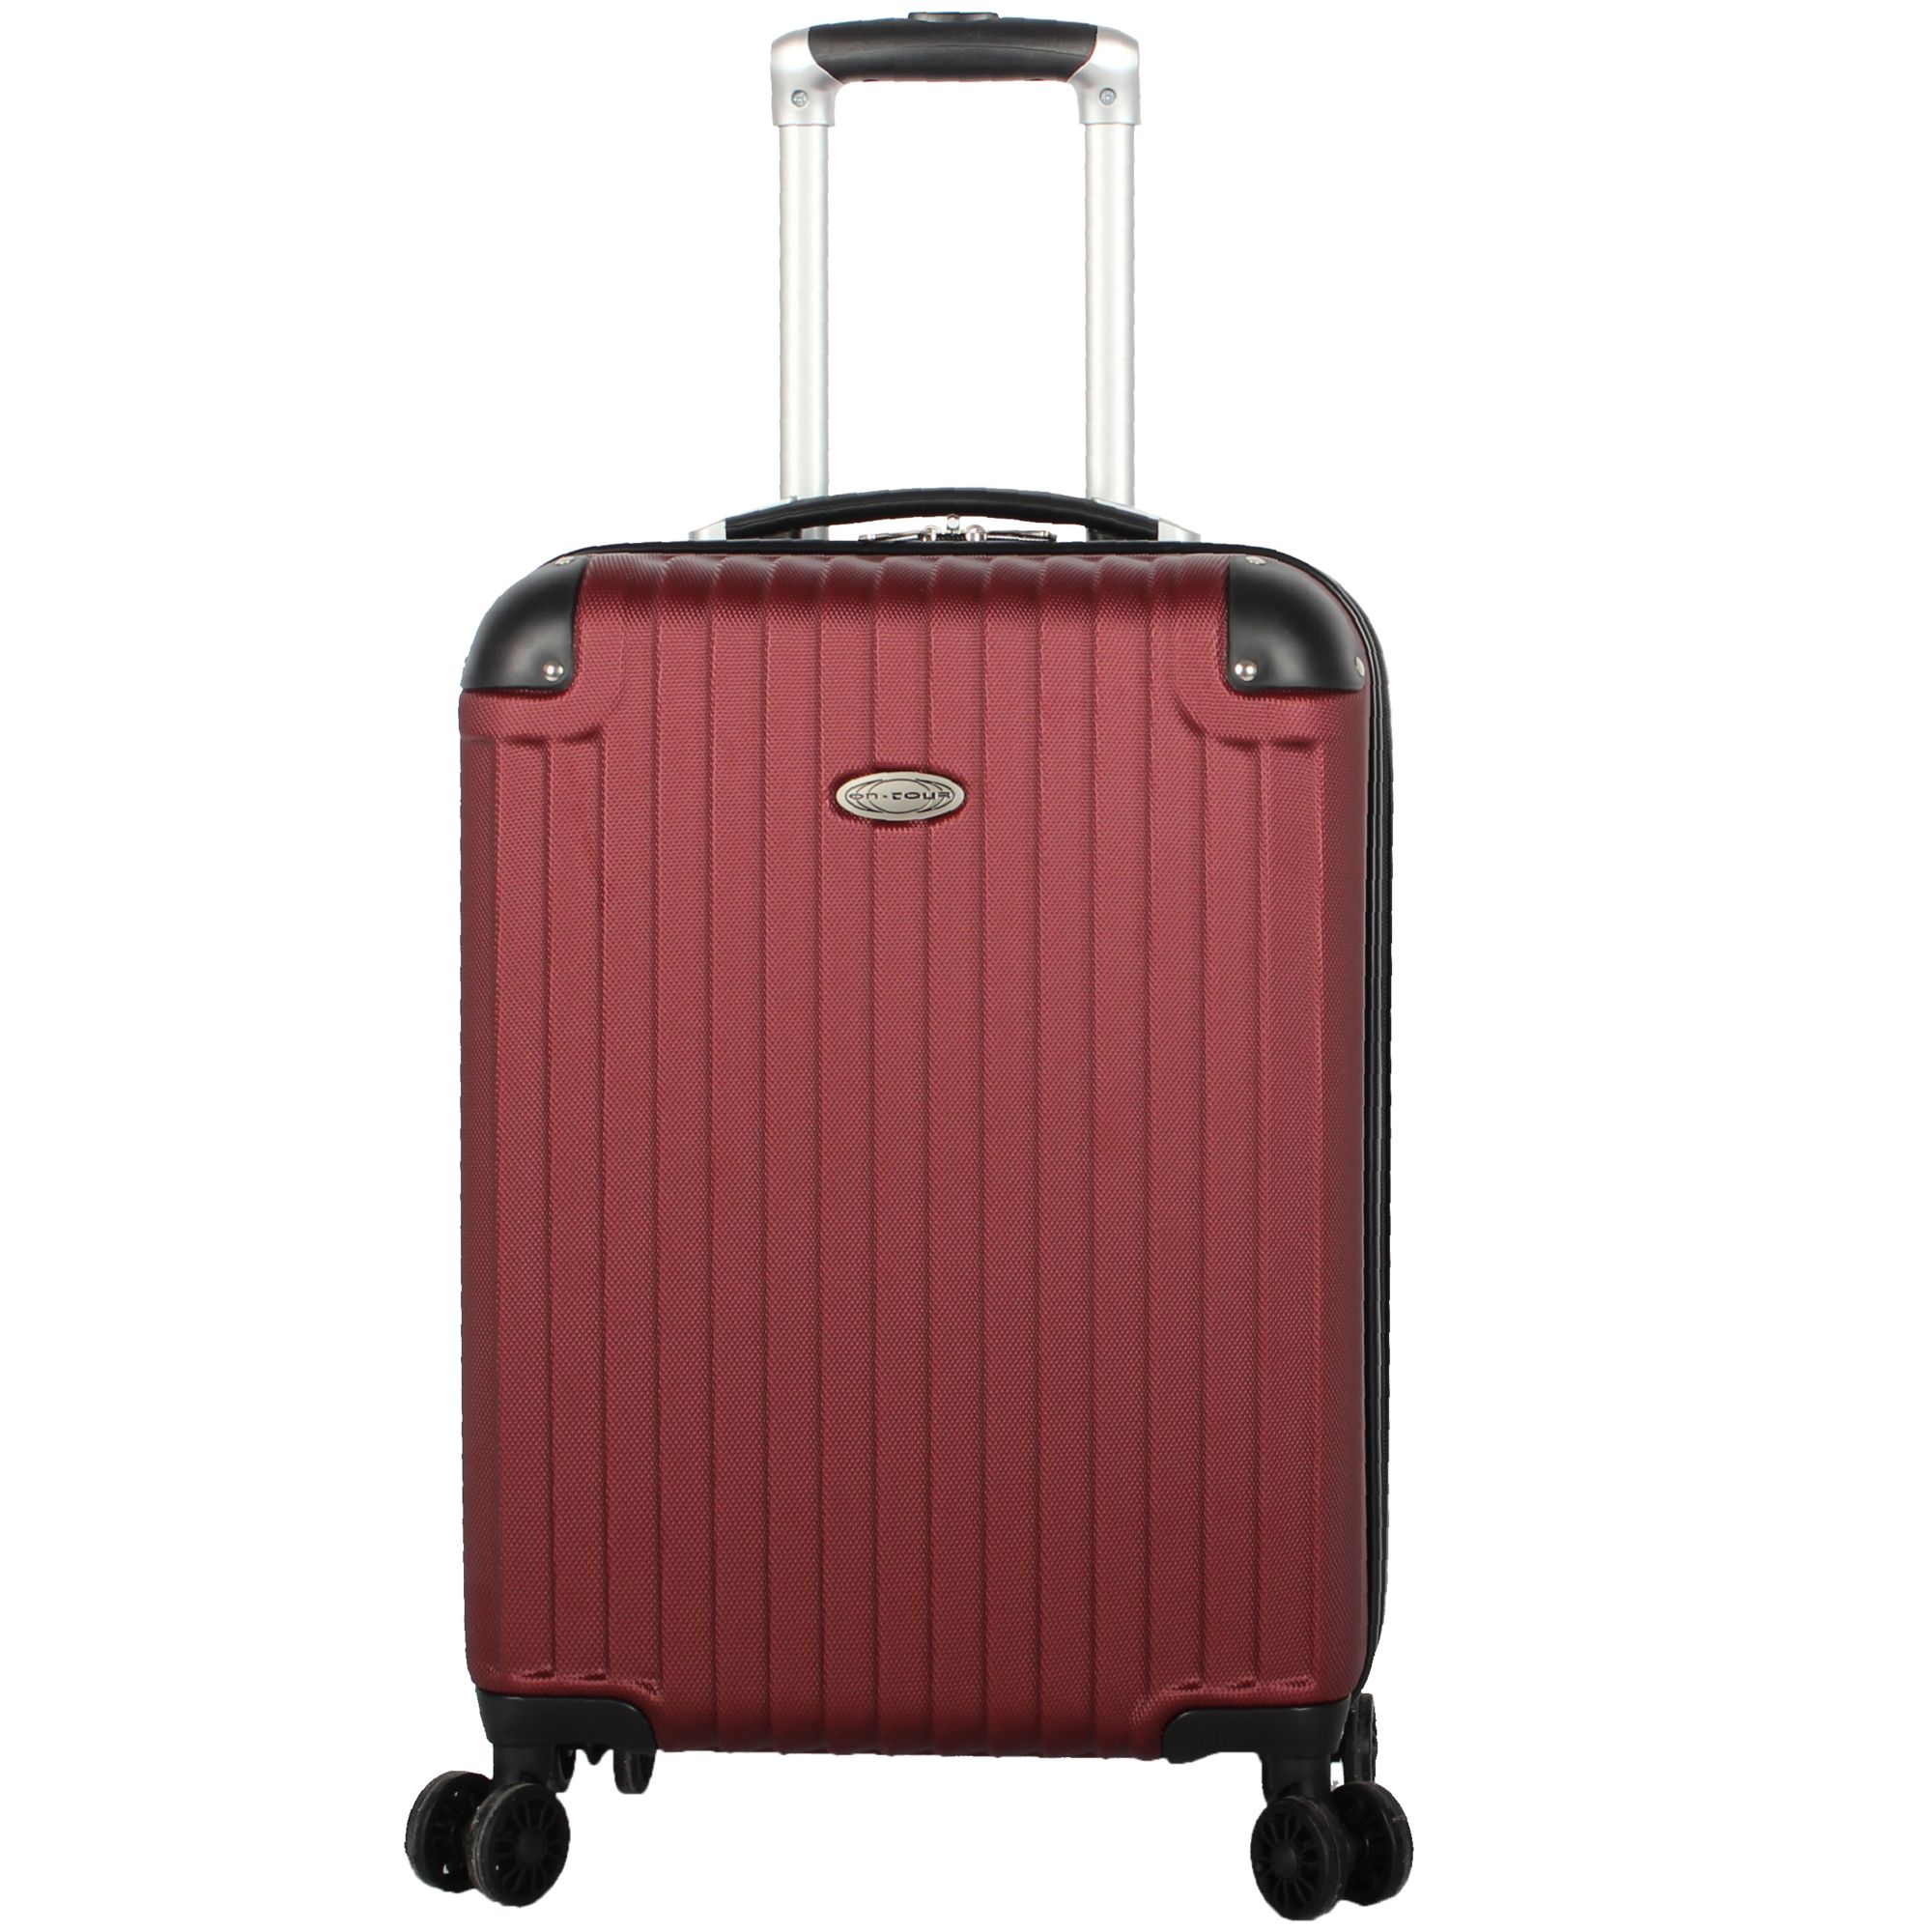 Carry on Luggage | BJ's Wholesale Club